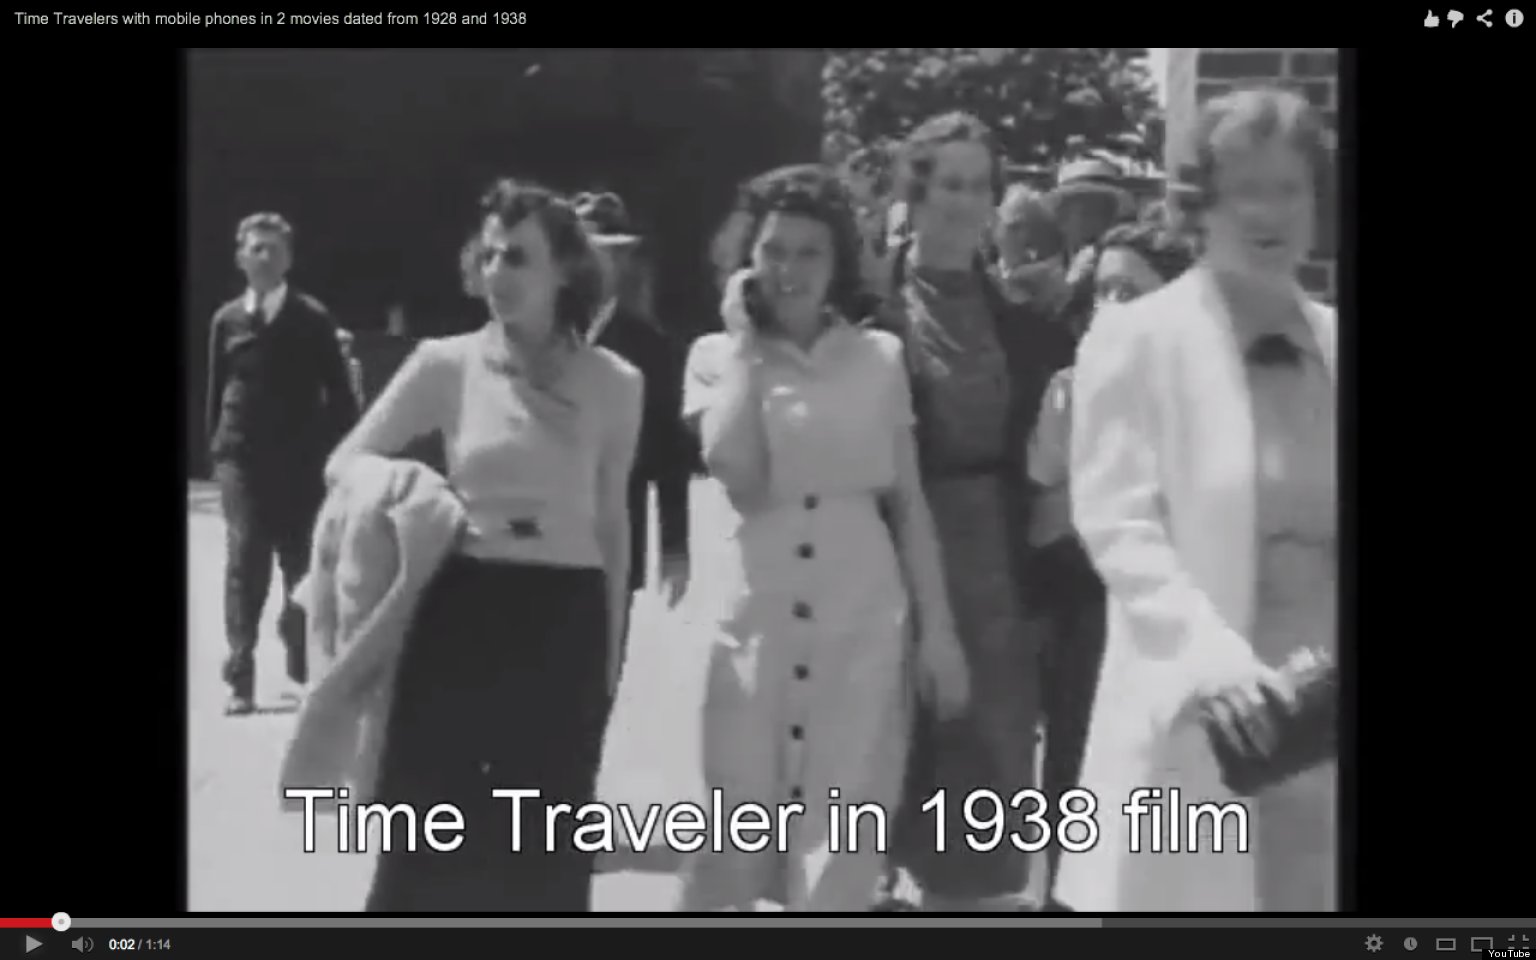 Mystery Of 1938 39;Time Traveler39; With Cell Phone Solved? VIDEO